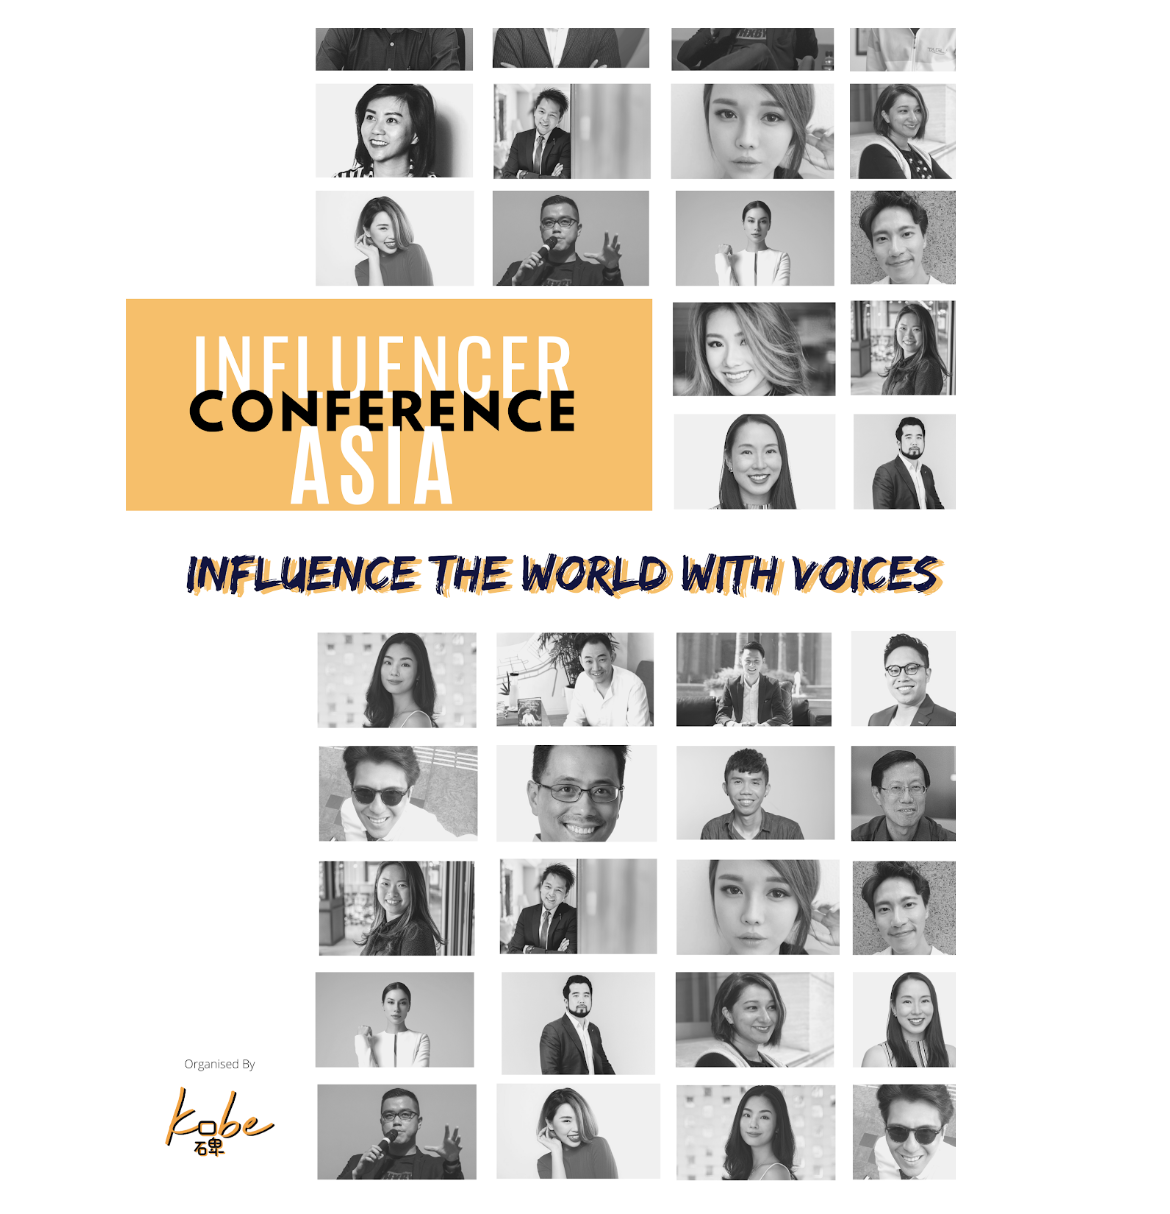 Influencer Conference Asia